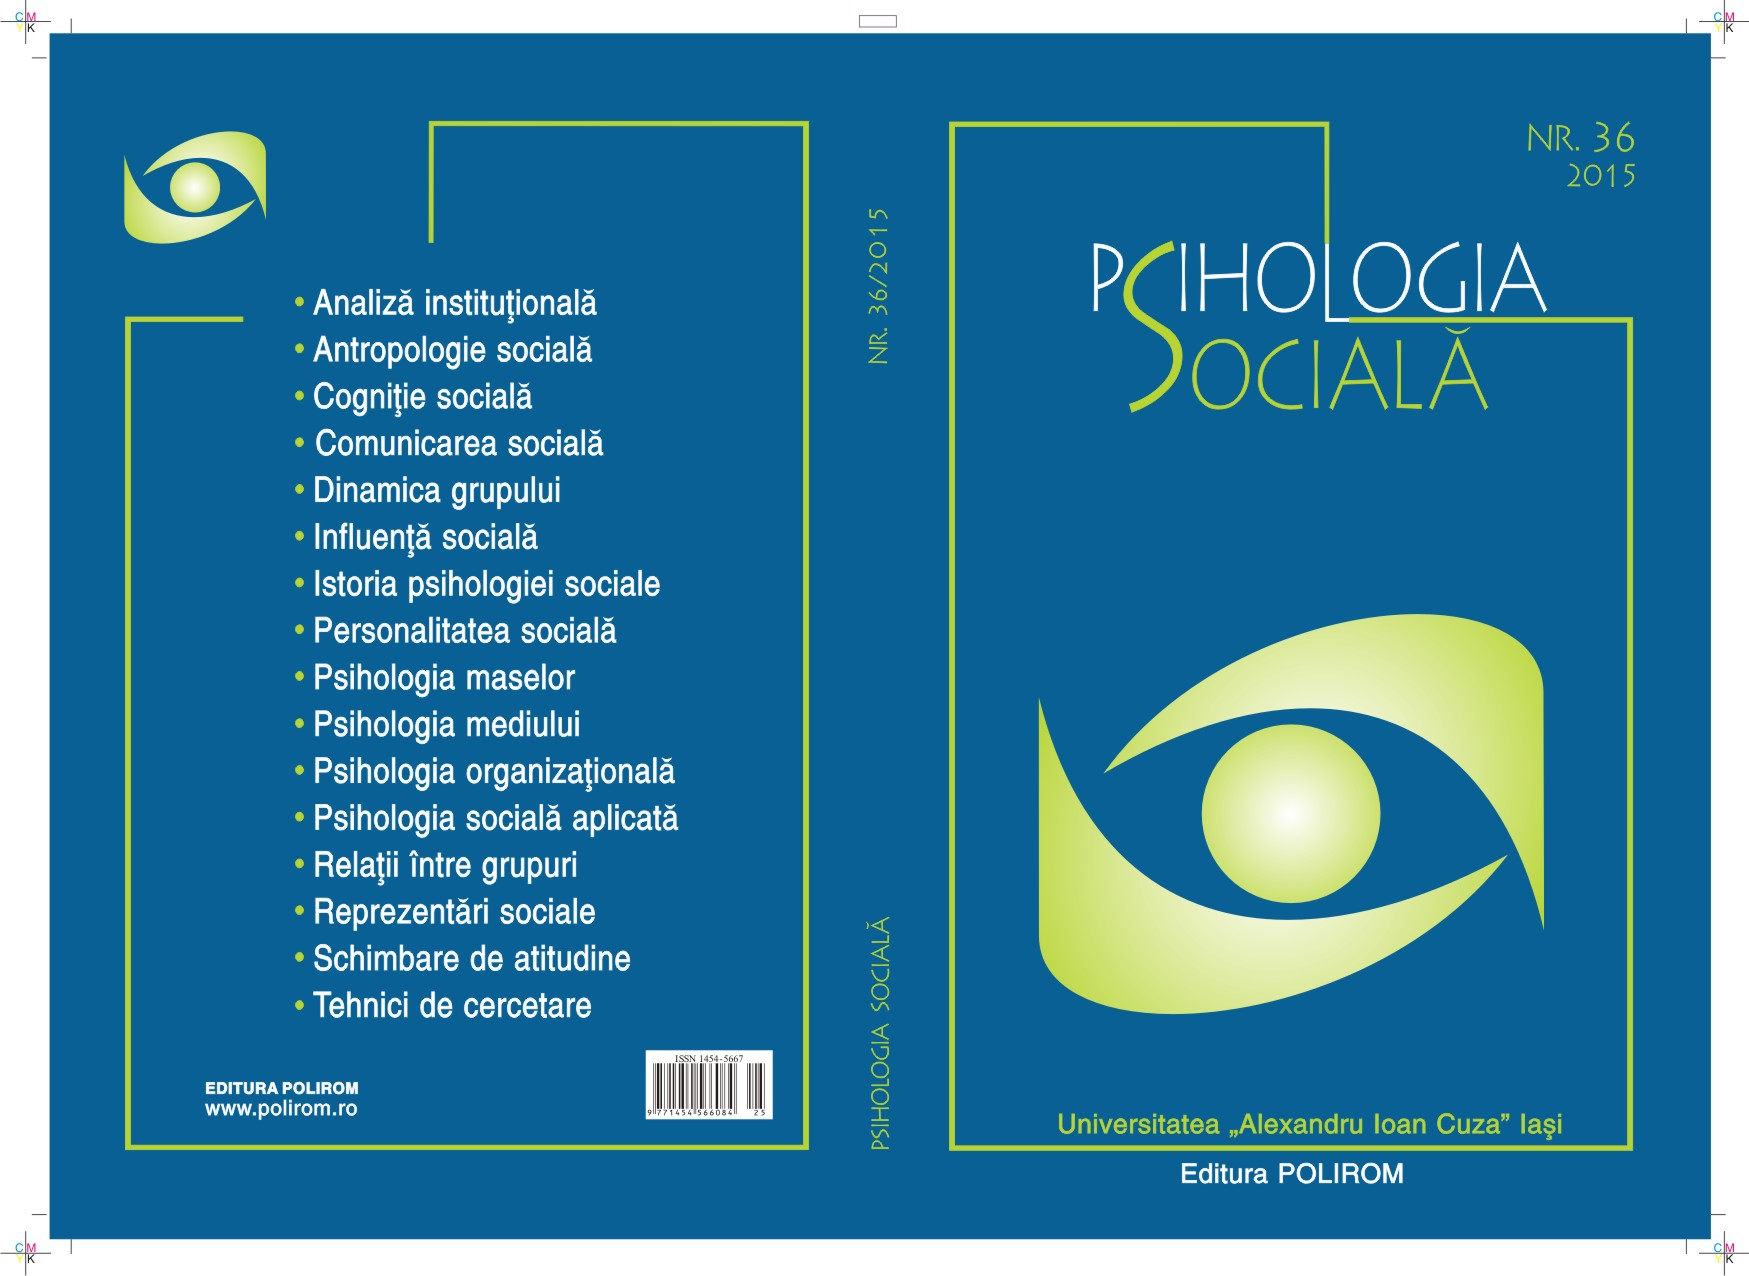 Institutional memory and social memory Psychology and pedagogy at the University of Iasi Cover Image